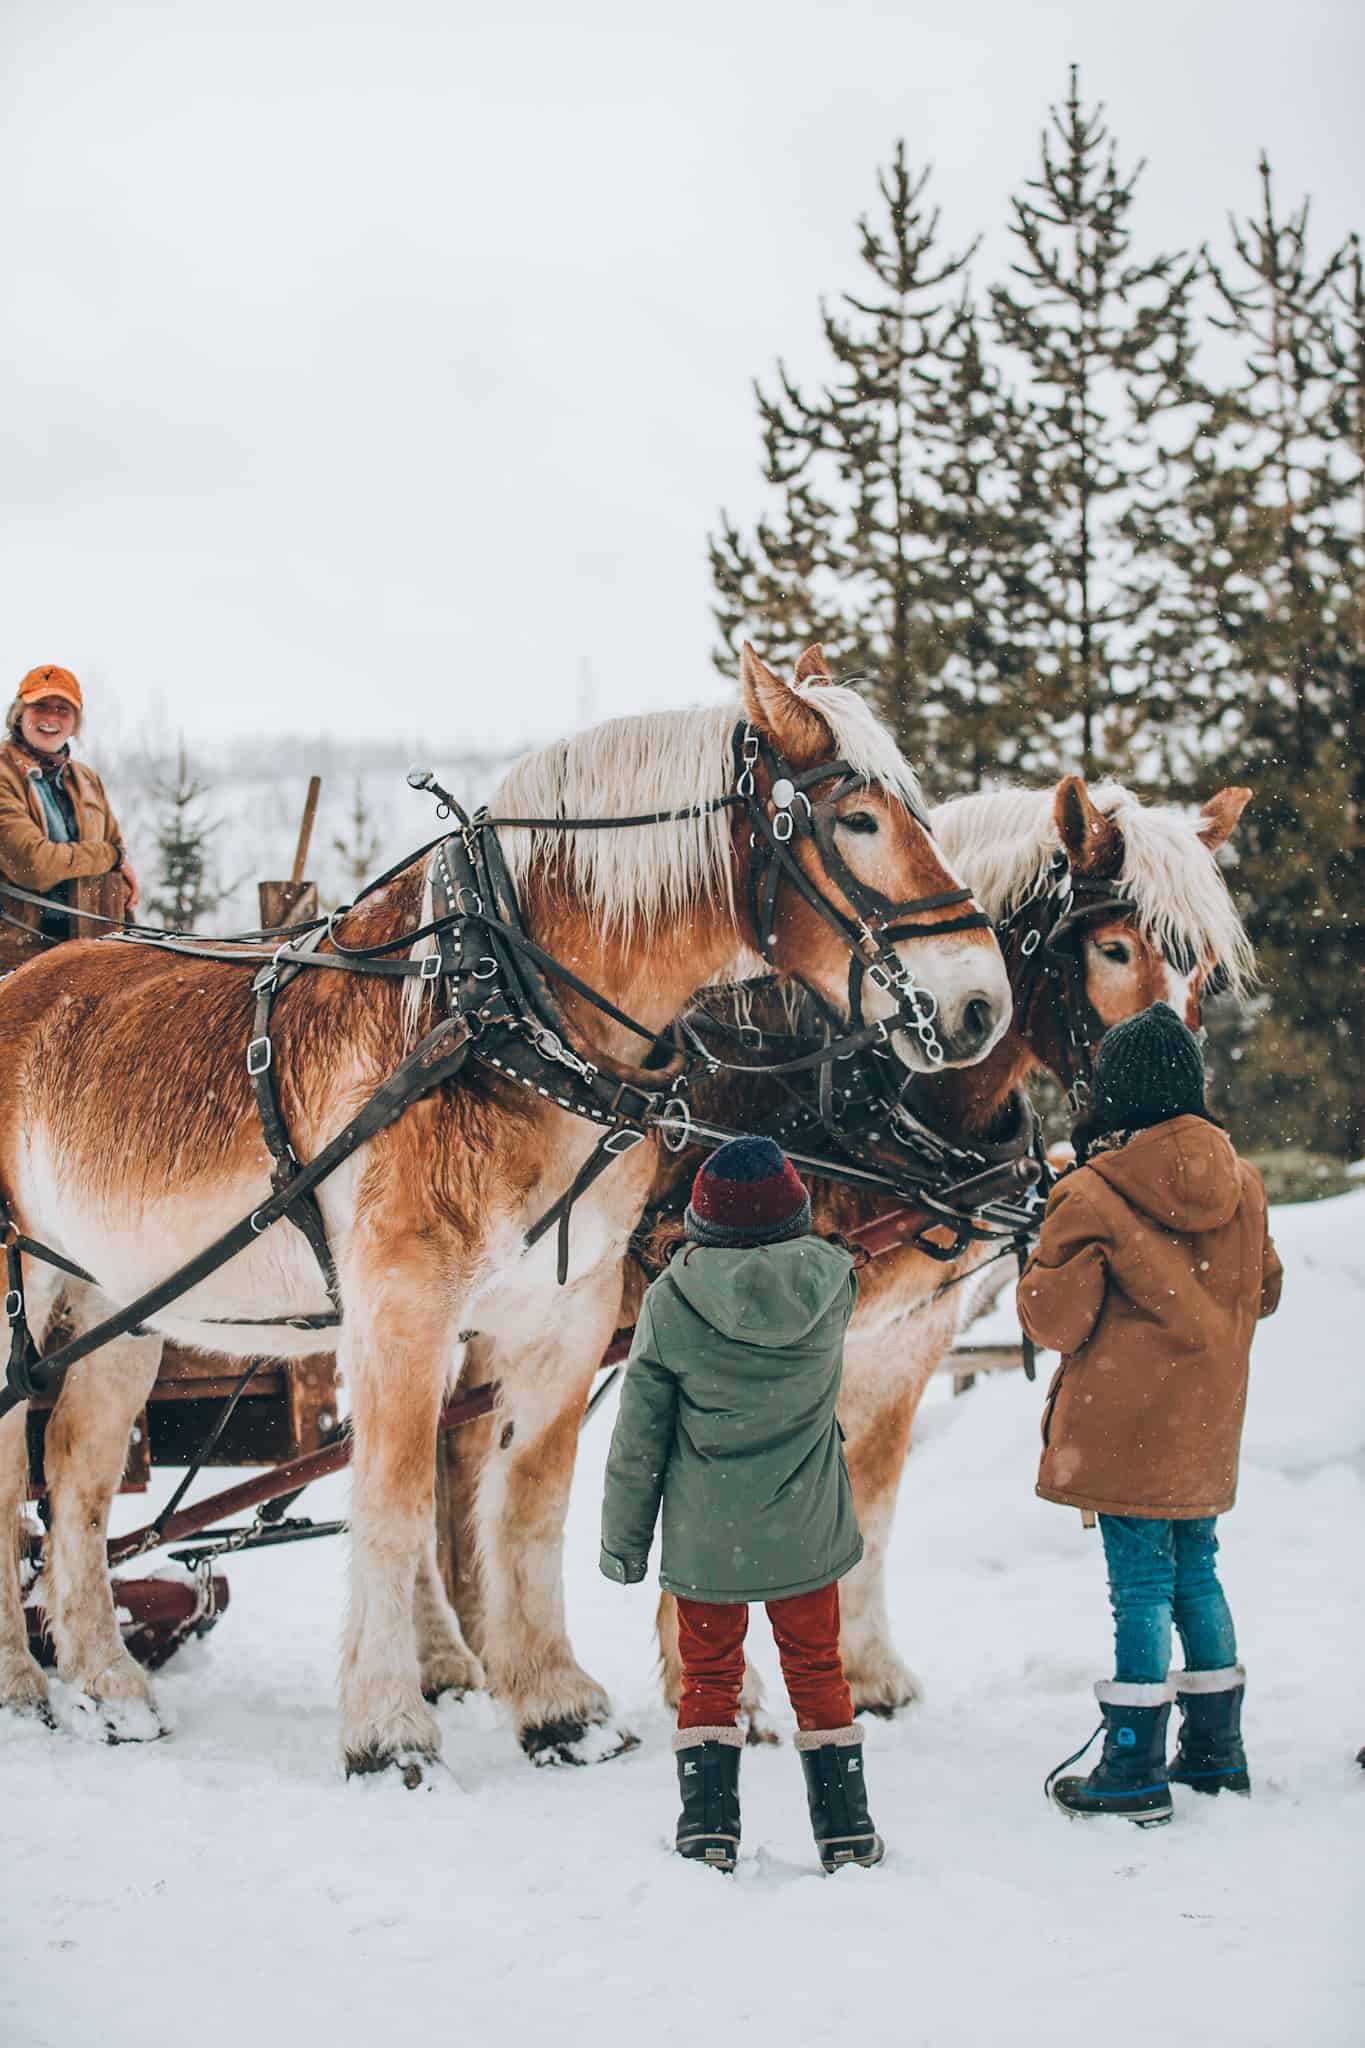 Winter Sleigh Ride and Activities for Kids - Vista Verde, CO